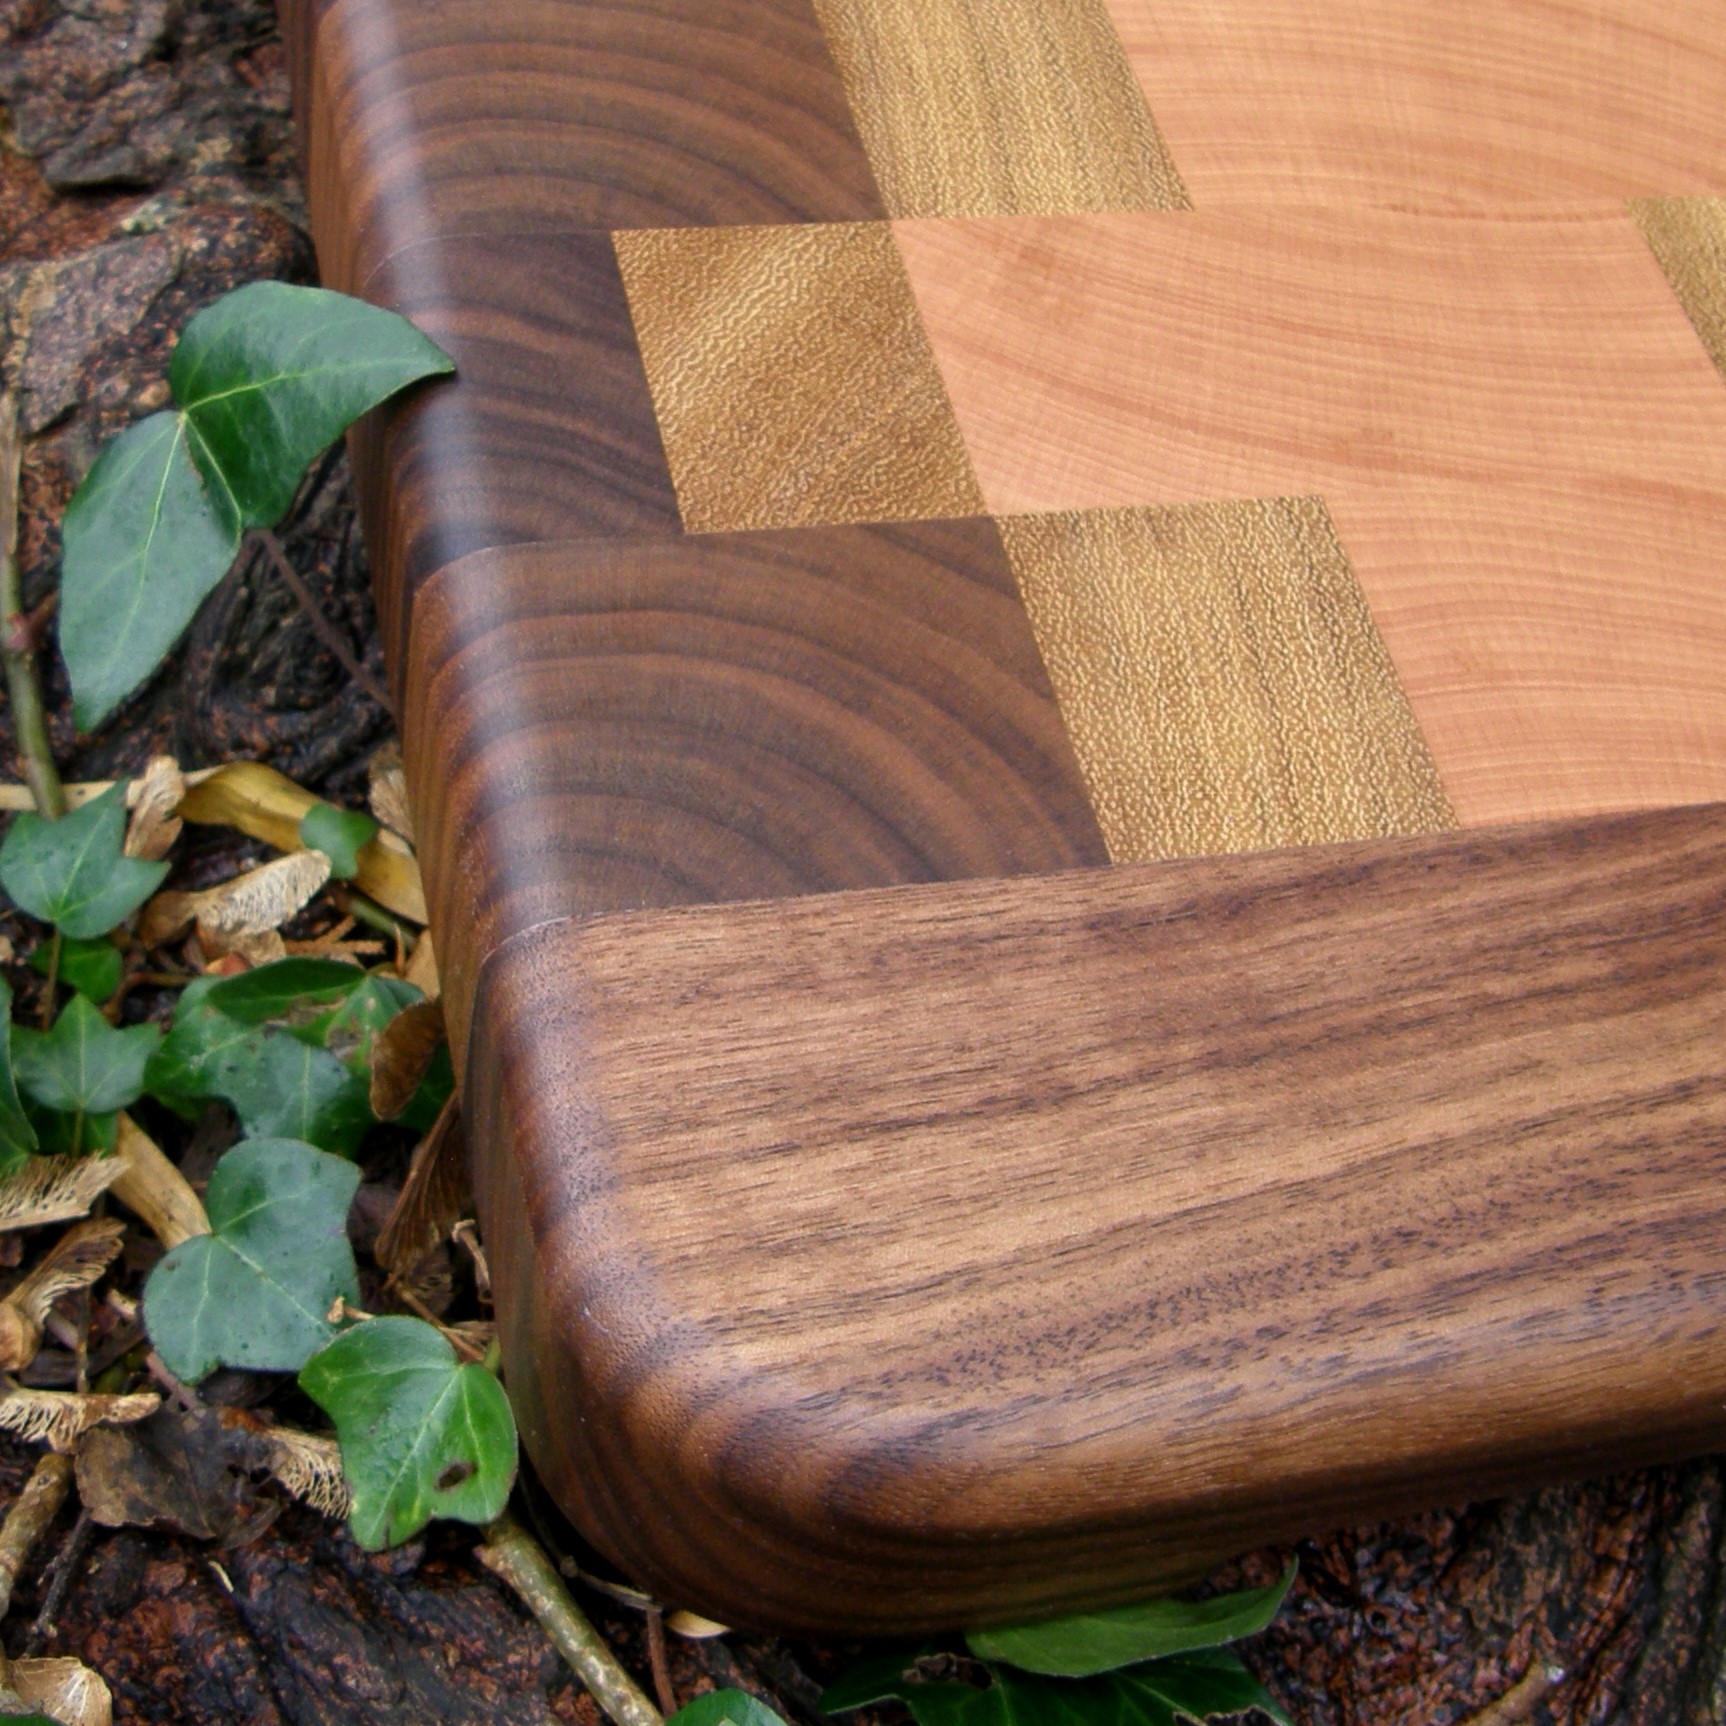 Crookhaven End Grain chopping board by Grant Designs.